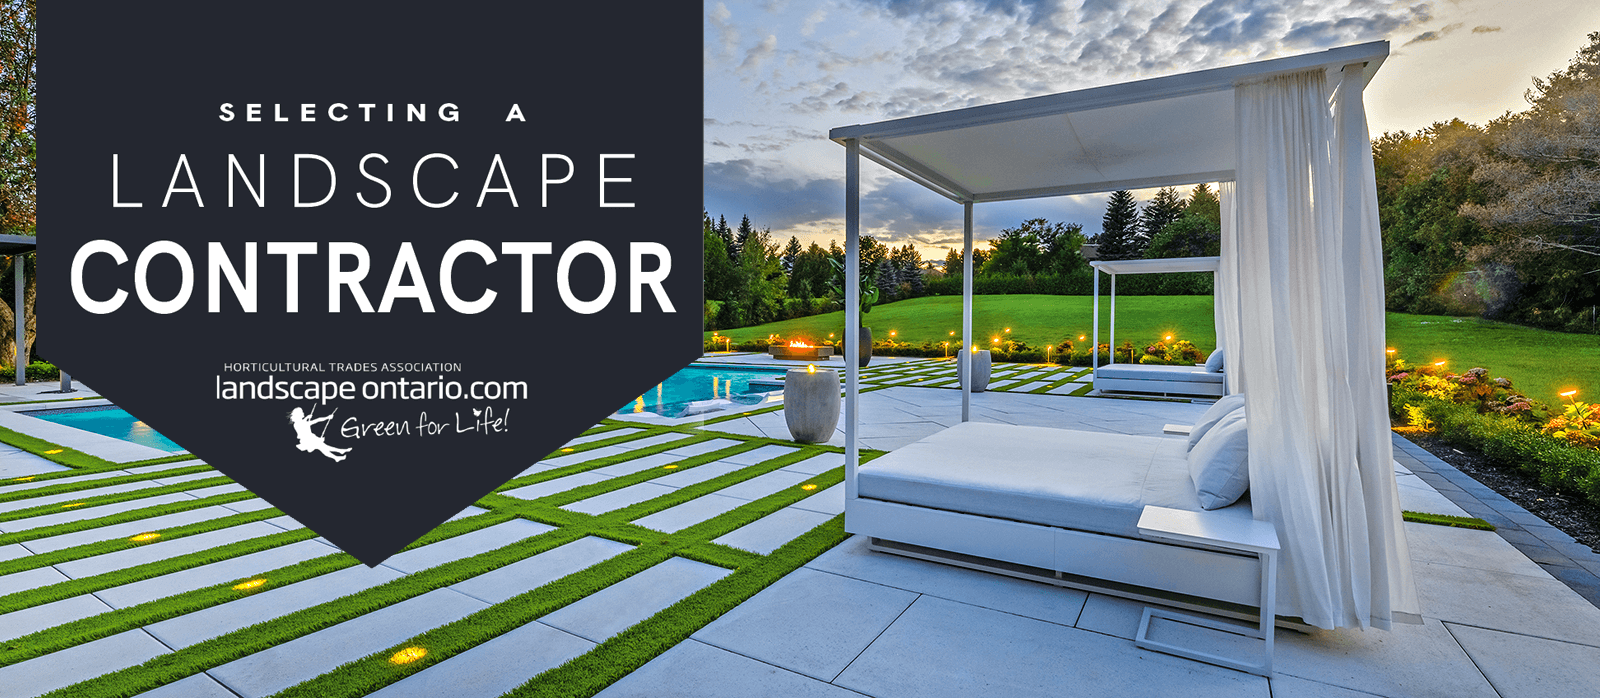 Selecting a landscape contractor